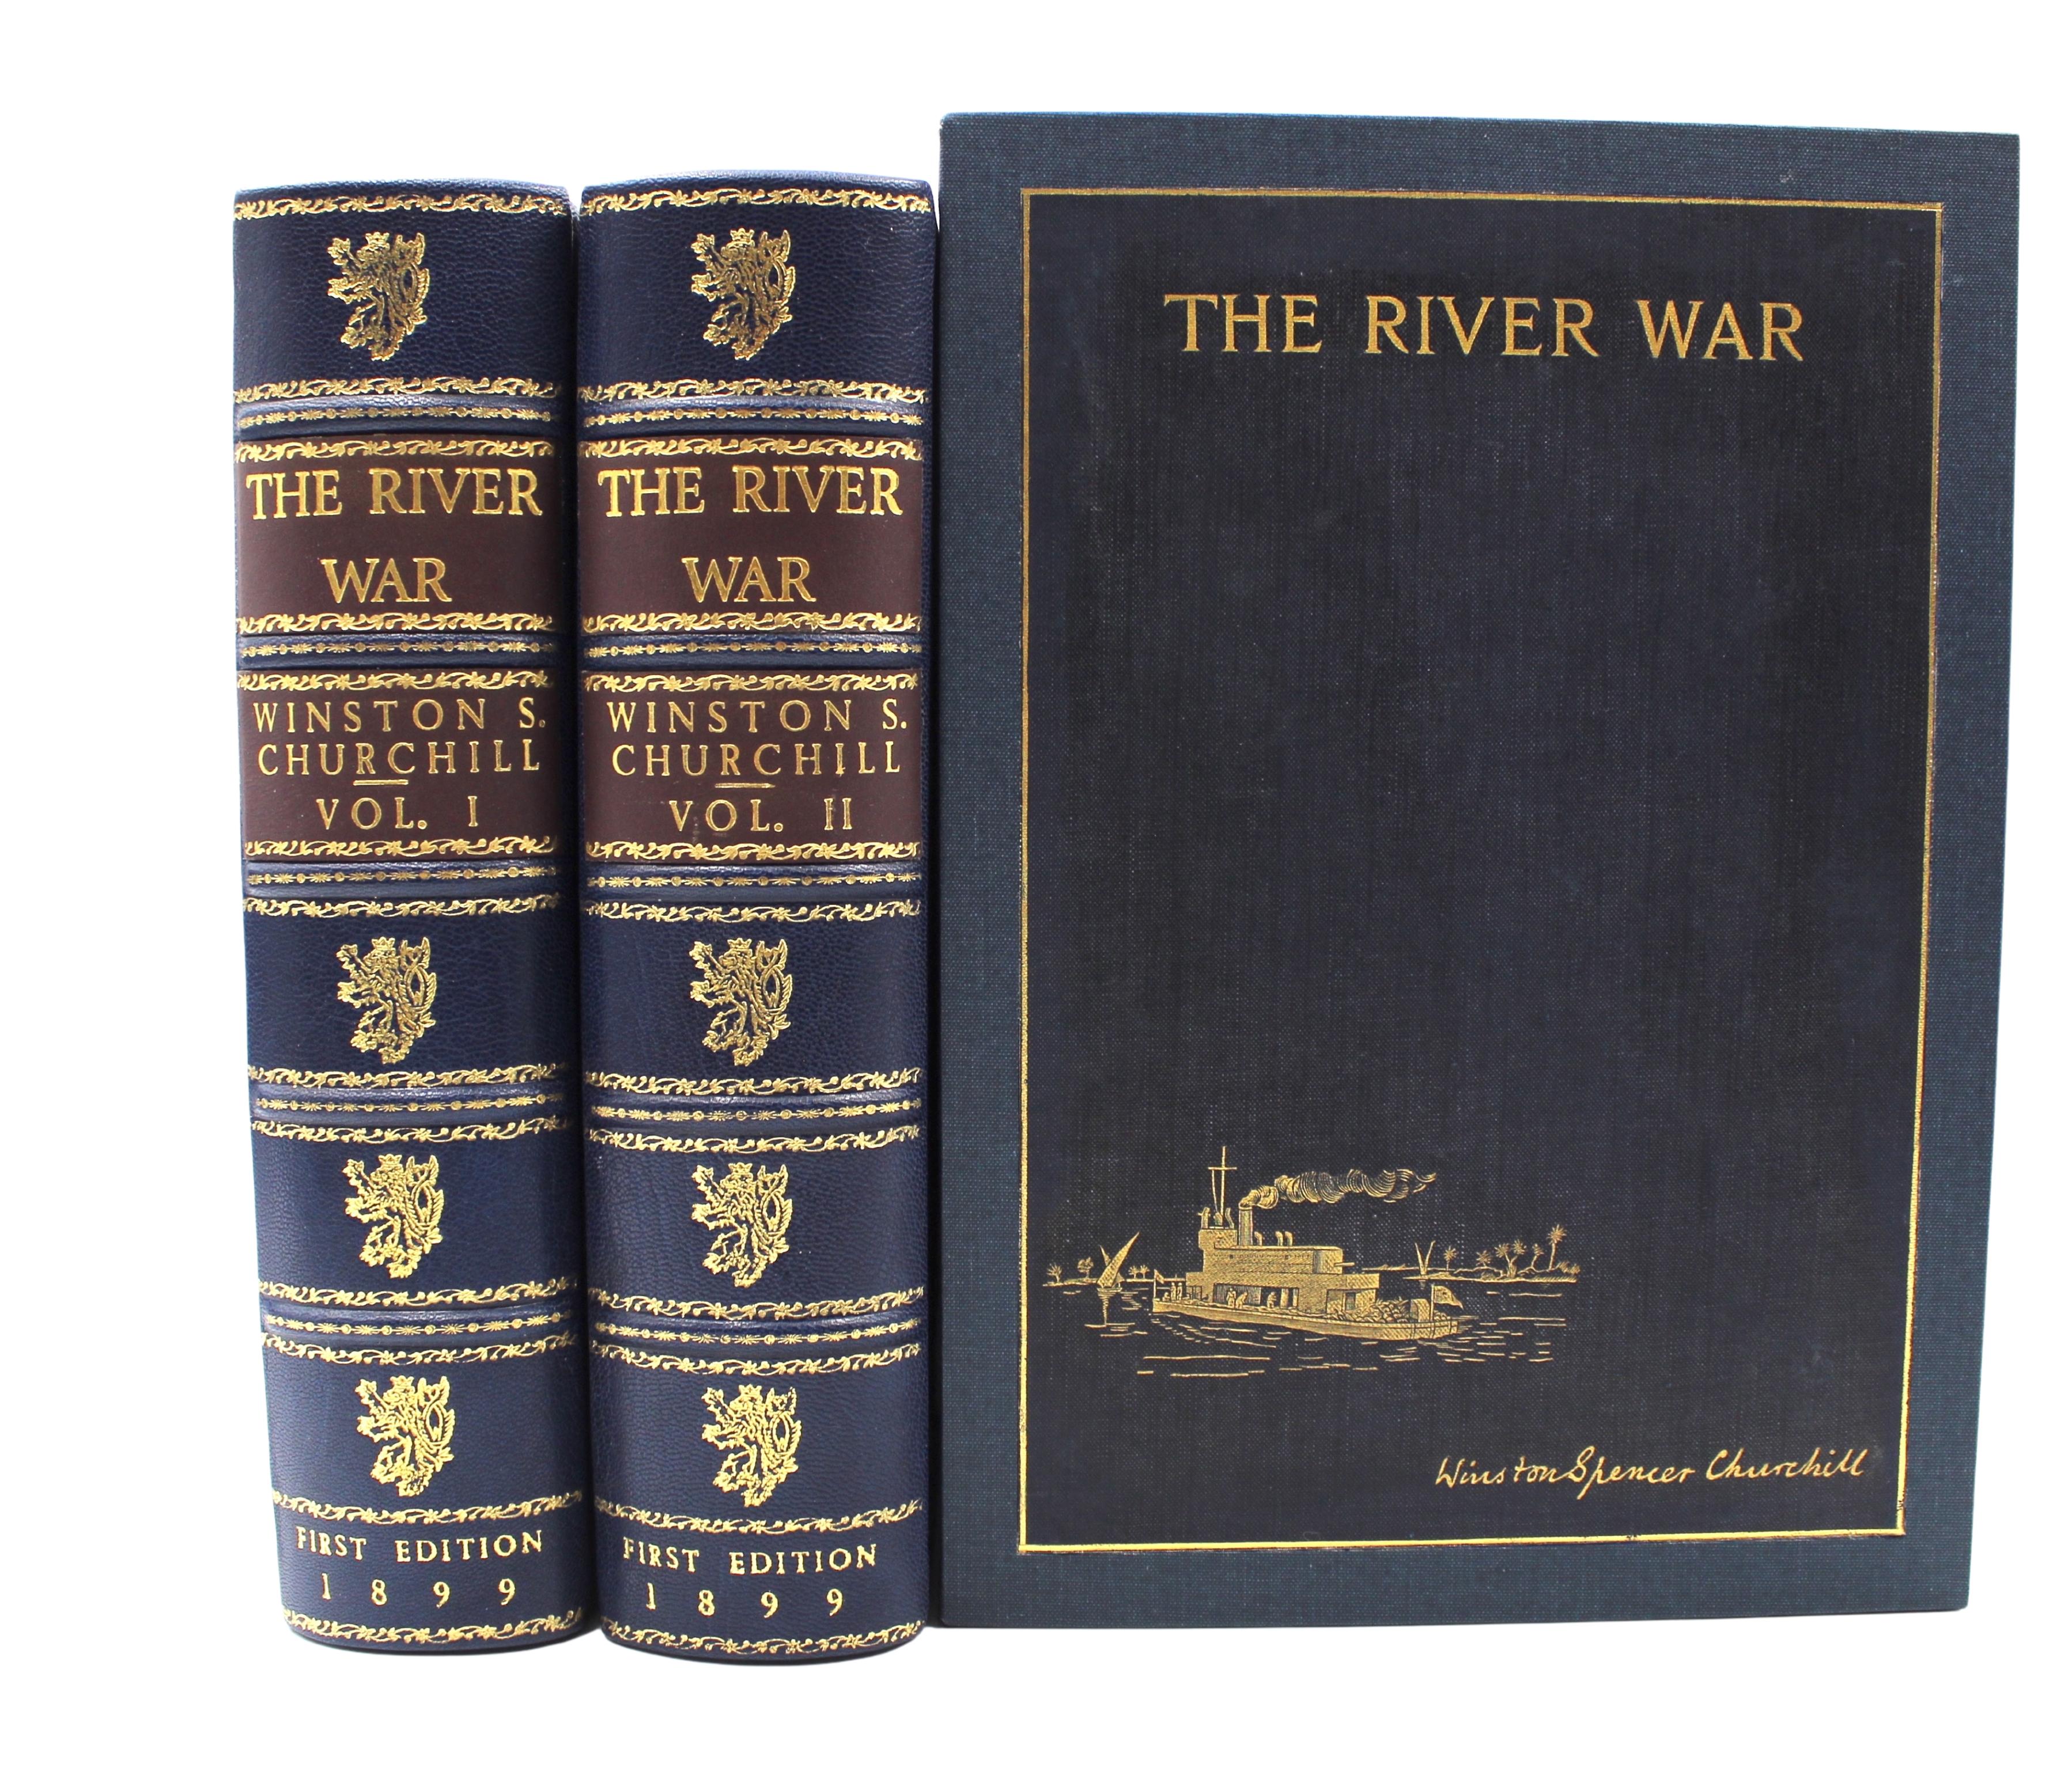 Churchill, Winston S. The River War: An Historical Account of the Reconquest of the Soudan. London: Longmans, Green, and Co., 1899. Edited by Col. F. Rhodes, D.S.O. Illustrated by Agnus McNeill, Seaforth Highlanders. Two Volume Set. First Edition